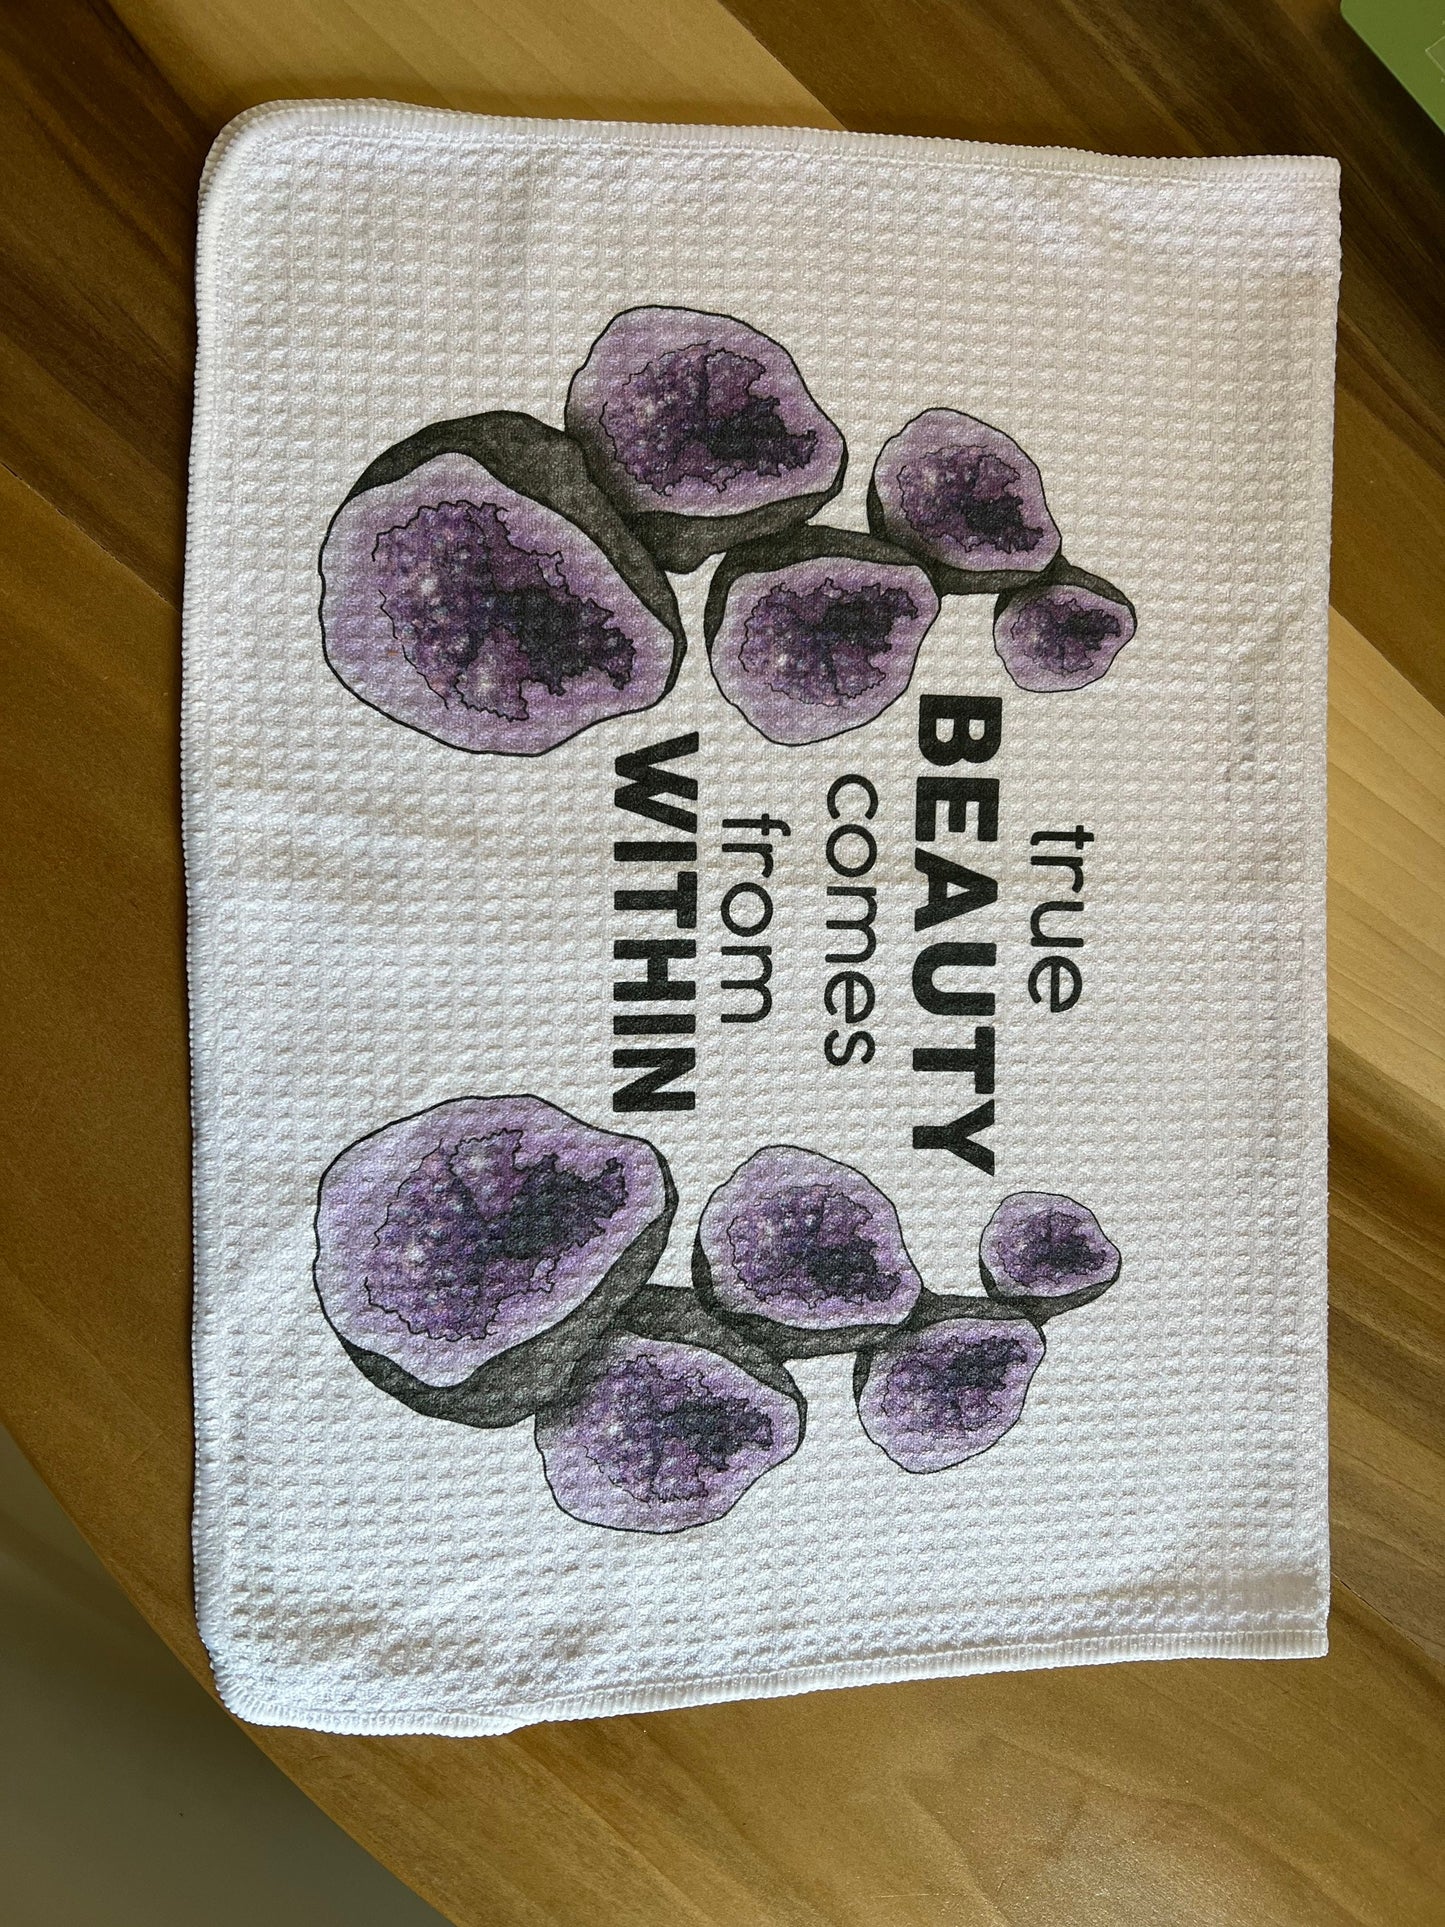 Beauty Comes from Within Geode Full Color Tea Towel